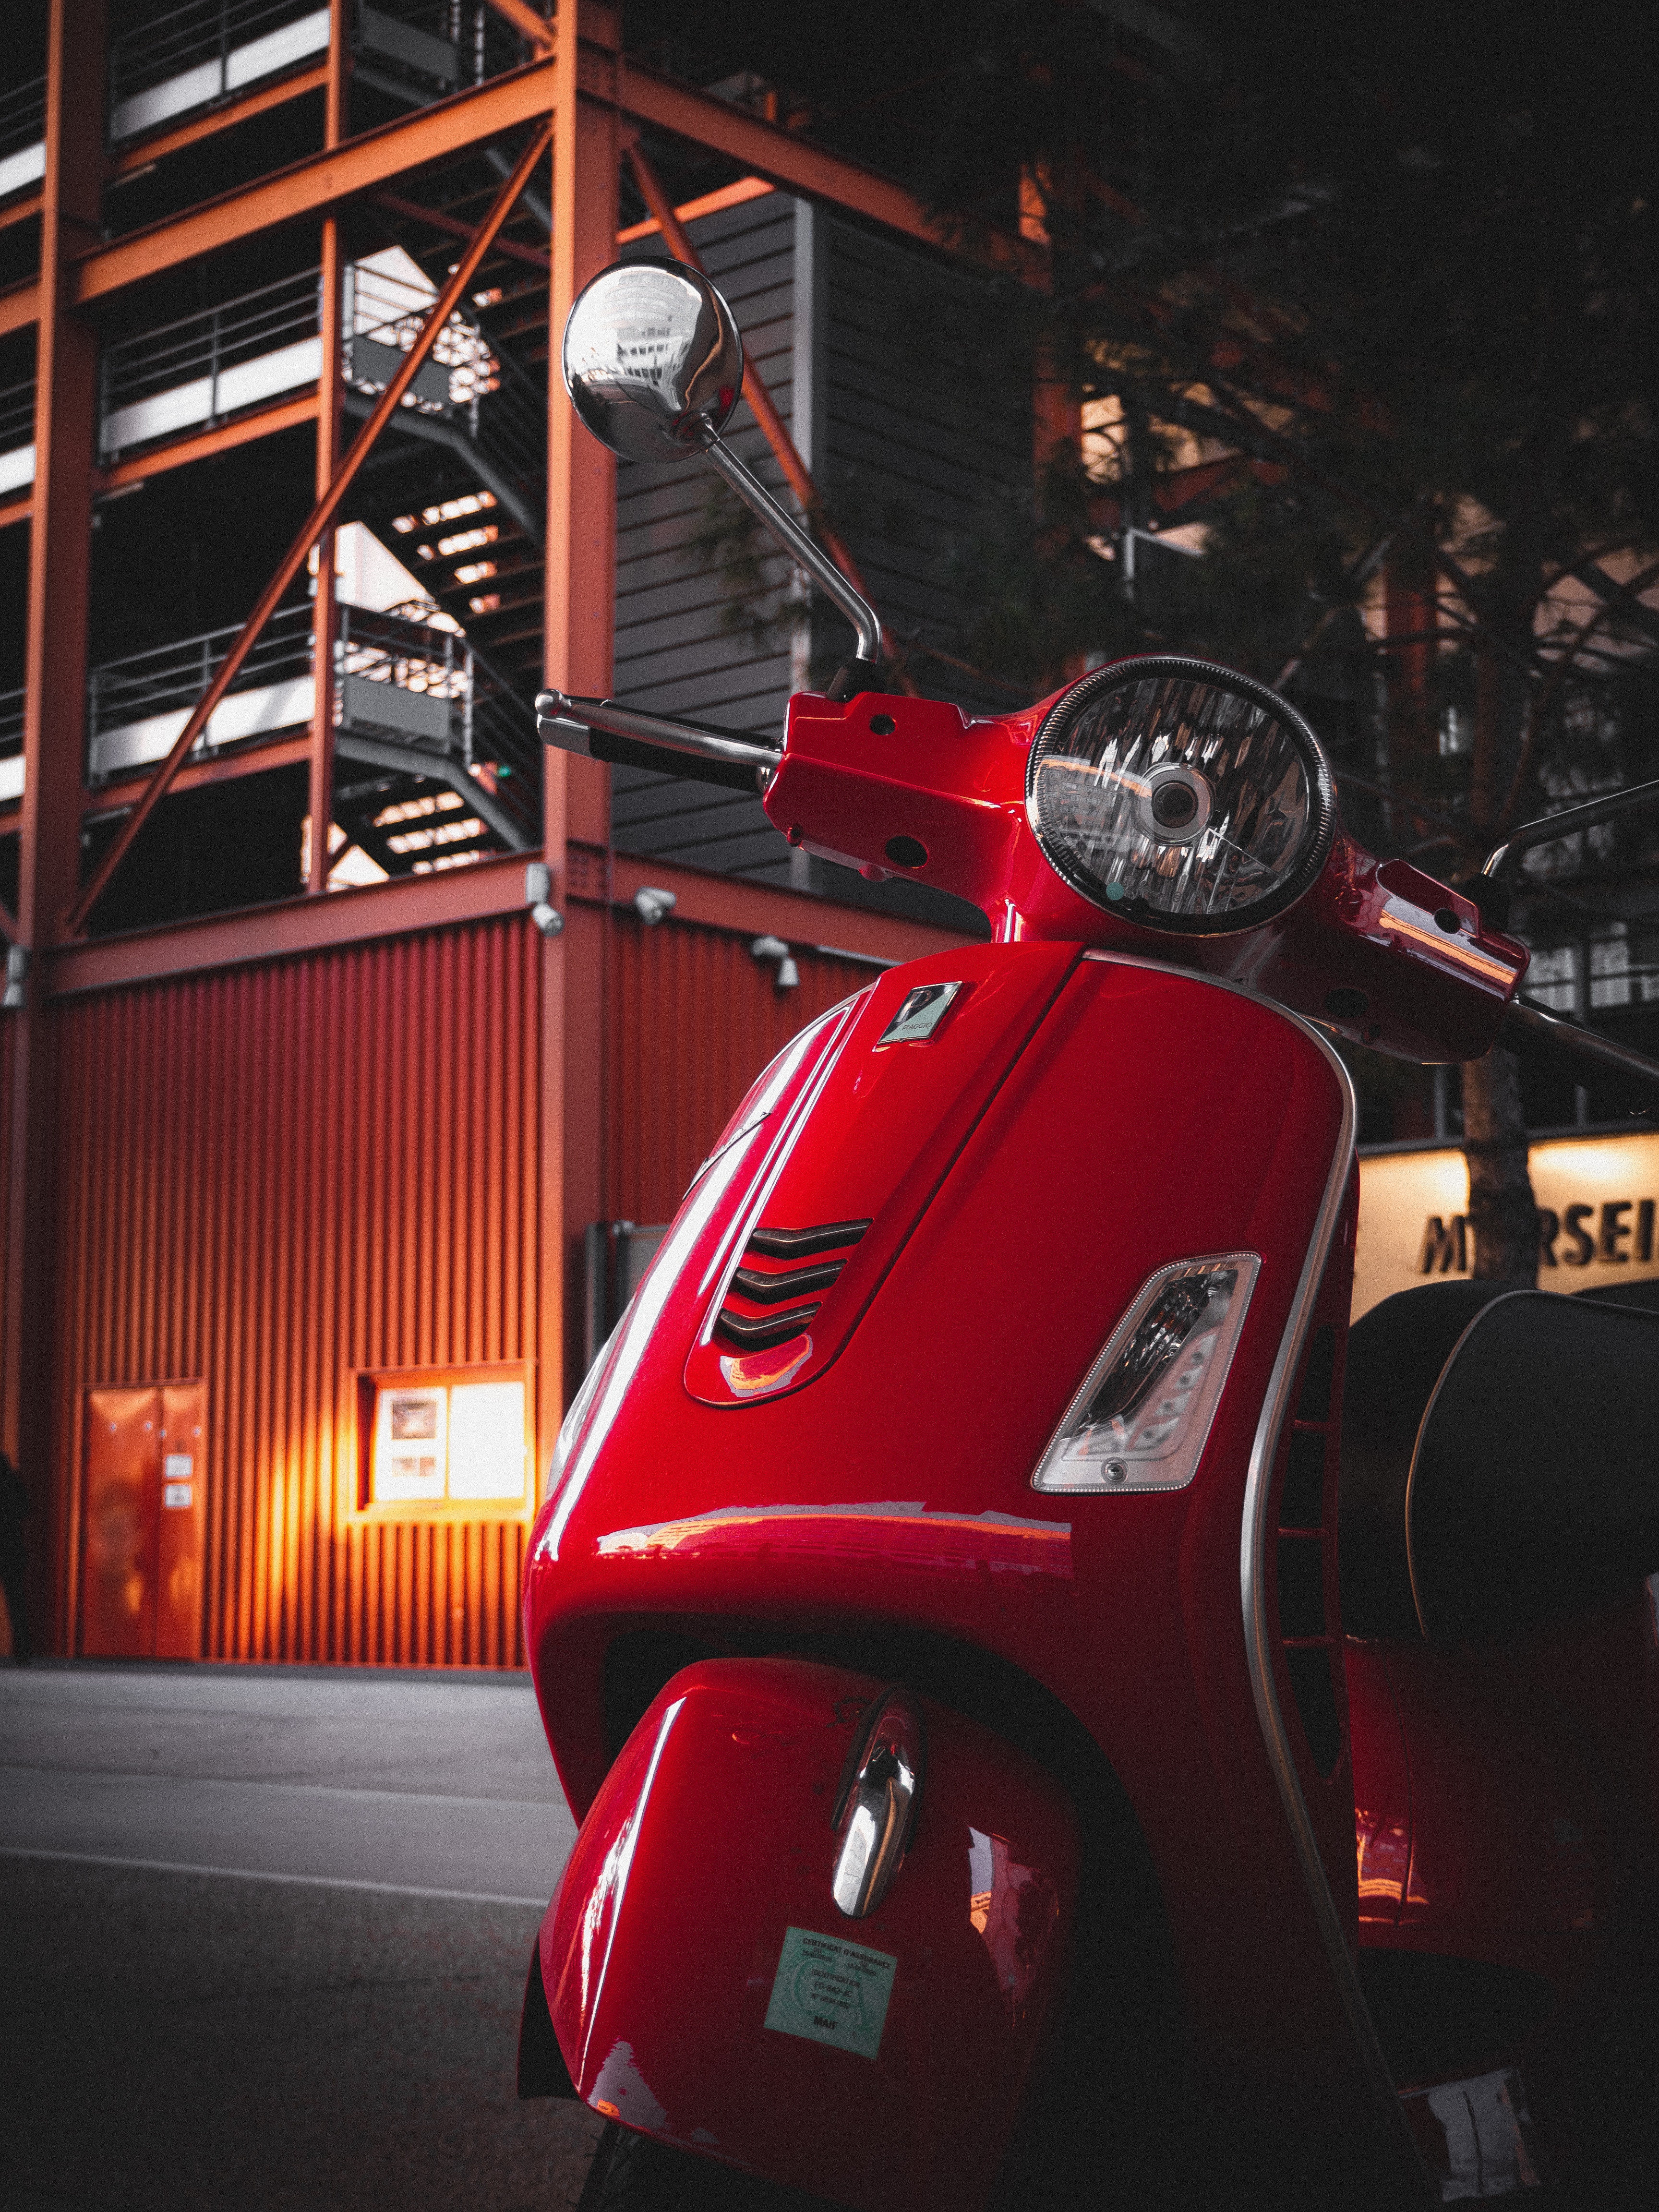 Scooter Photos, Download The BEST Free Scooter Stock Photos & HD Images